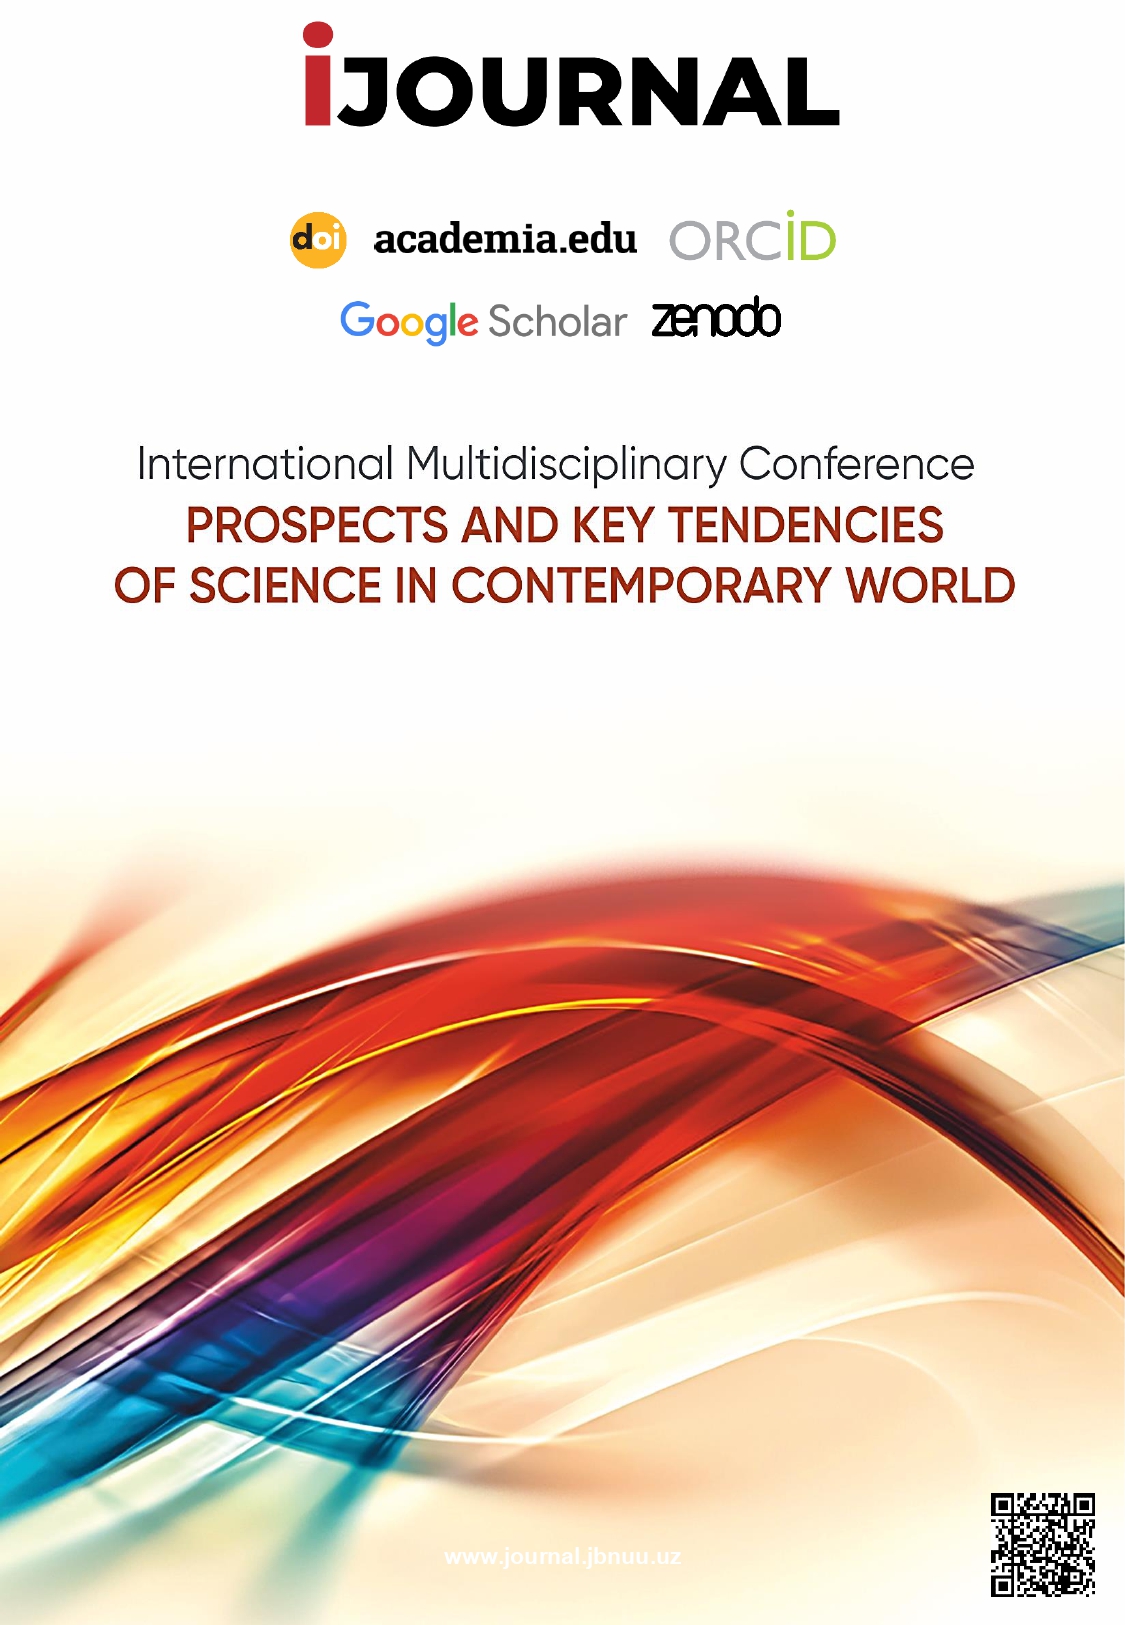 					View 2023: International Multidisciplinary Conference “Prospects and Key Tendencies of Science in Contemporary World”
				